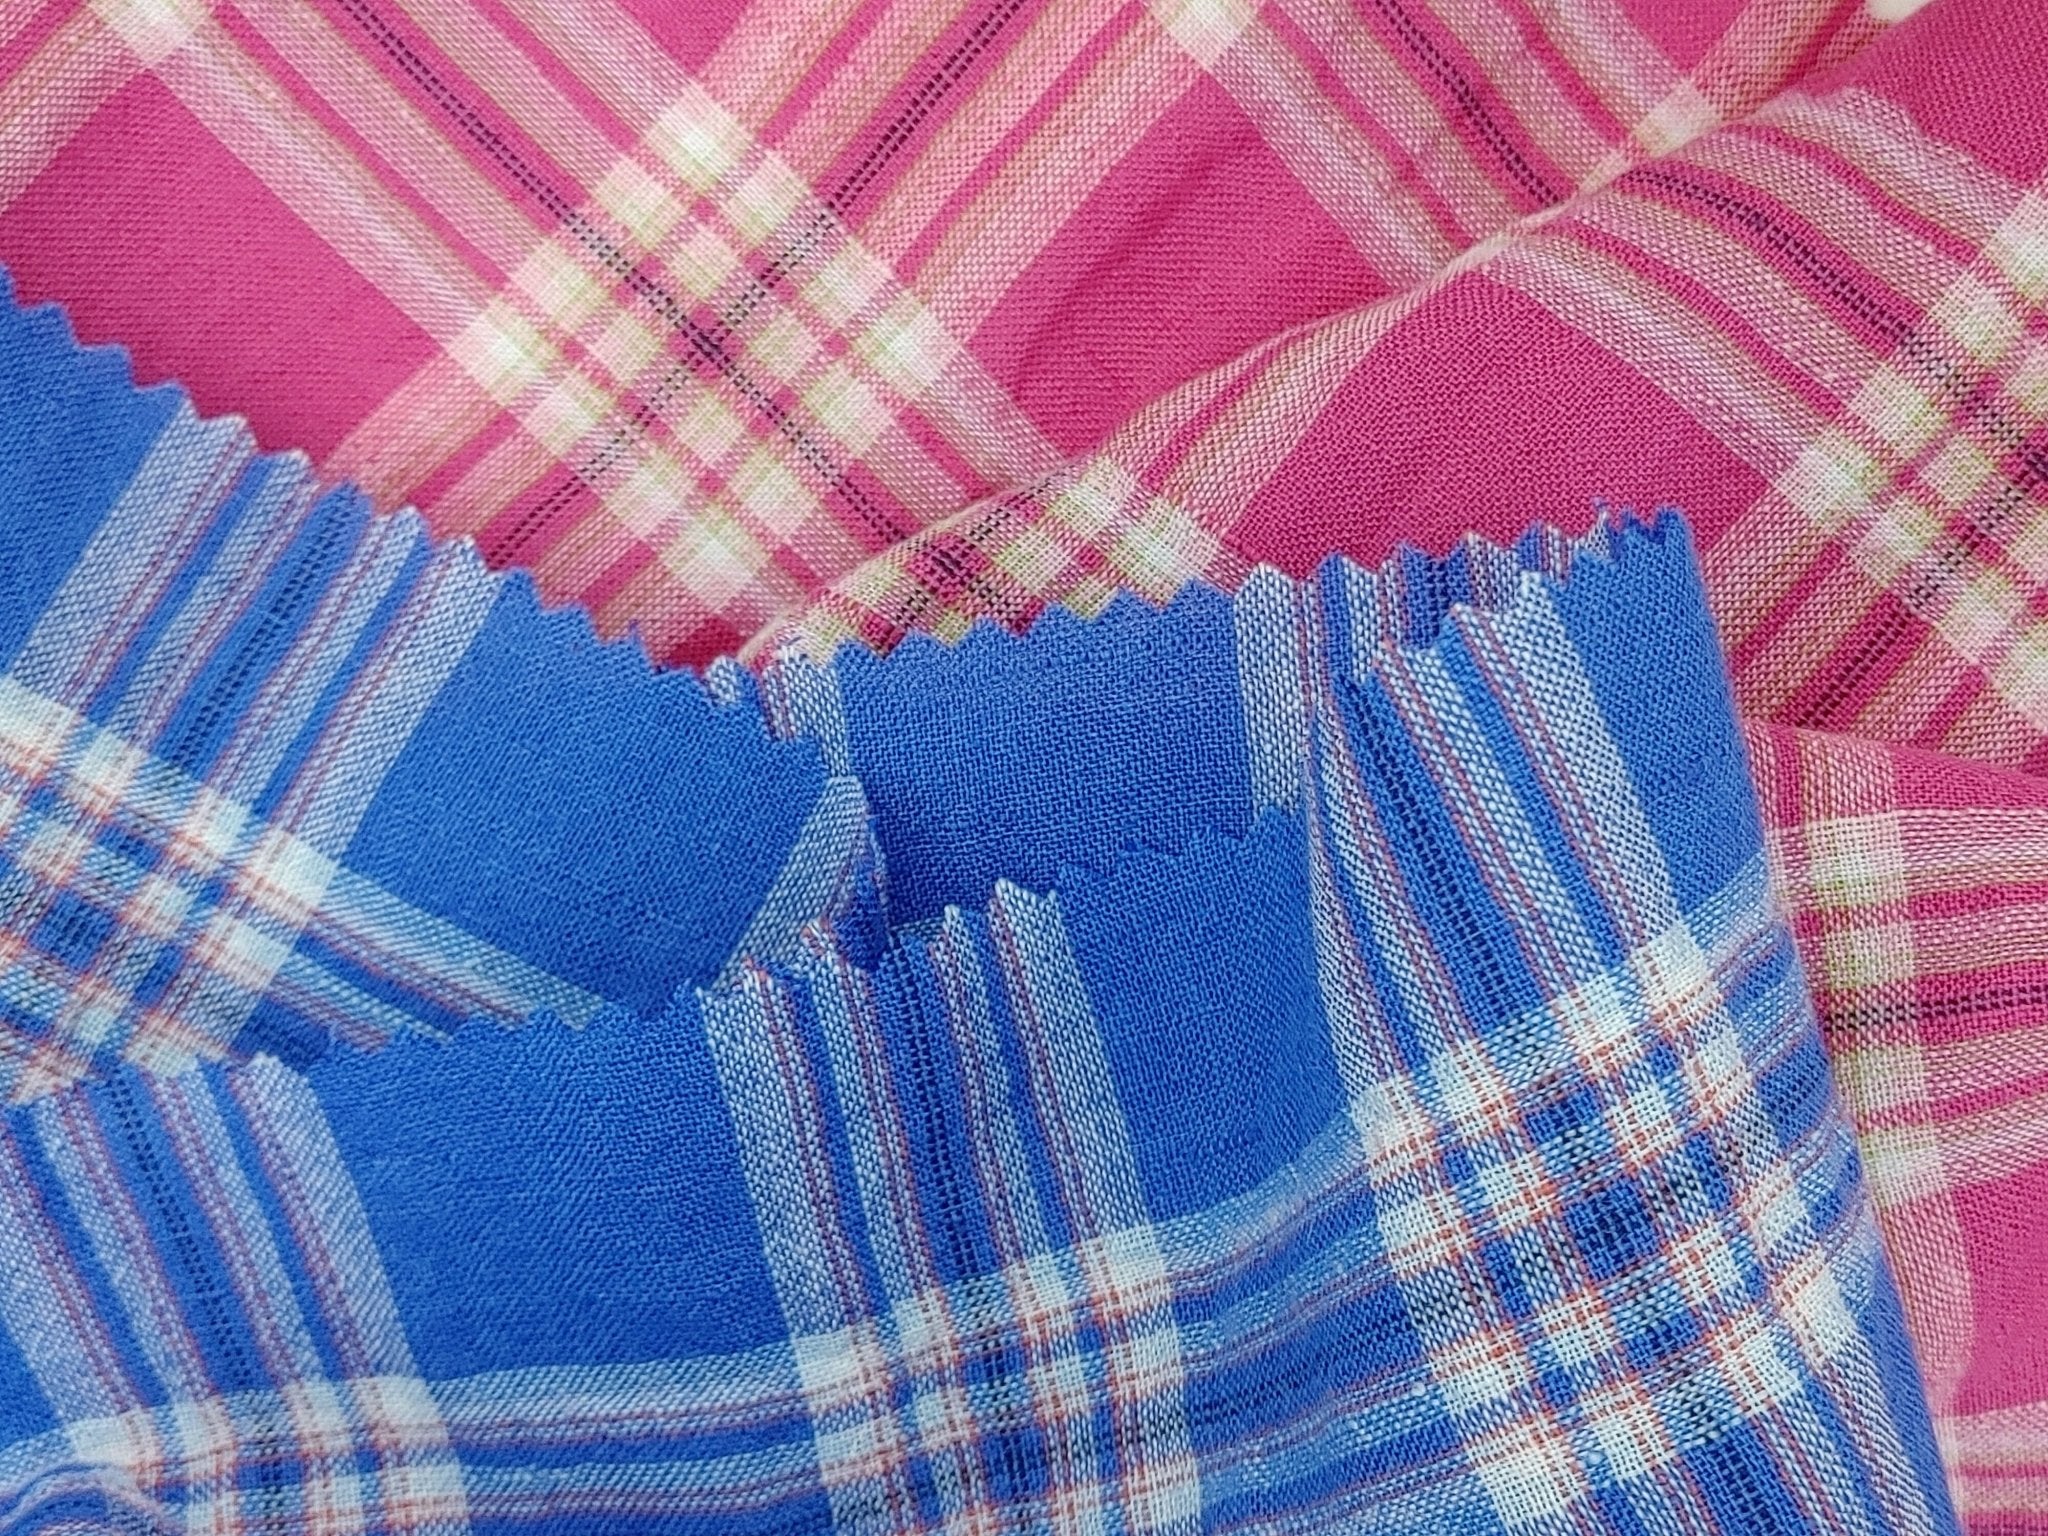 Wrinkled Plaid Fabric: Linen Cotton PU in Pink and Blue Dual Colorway 7269 7270 - The Linen Lab - Pink